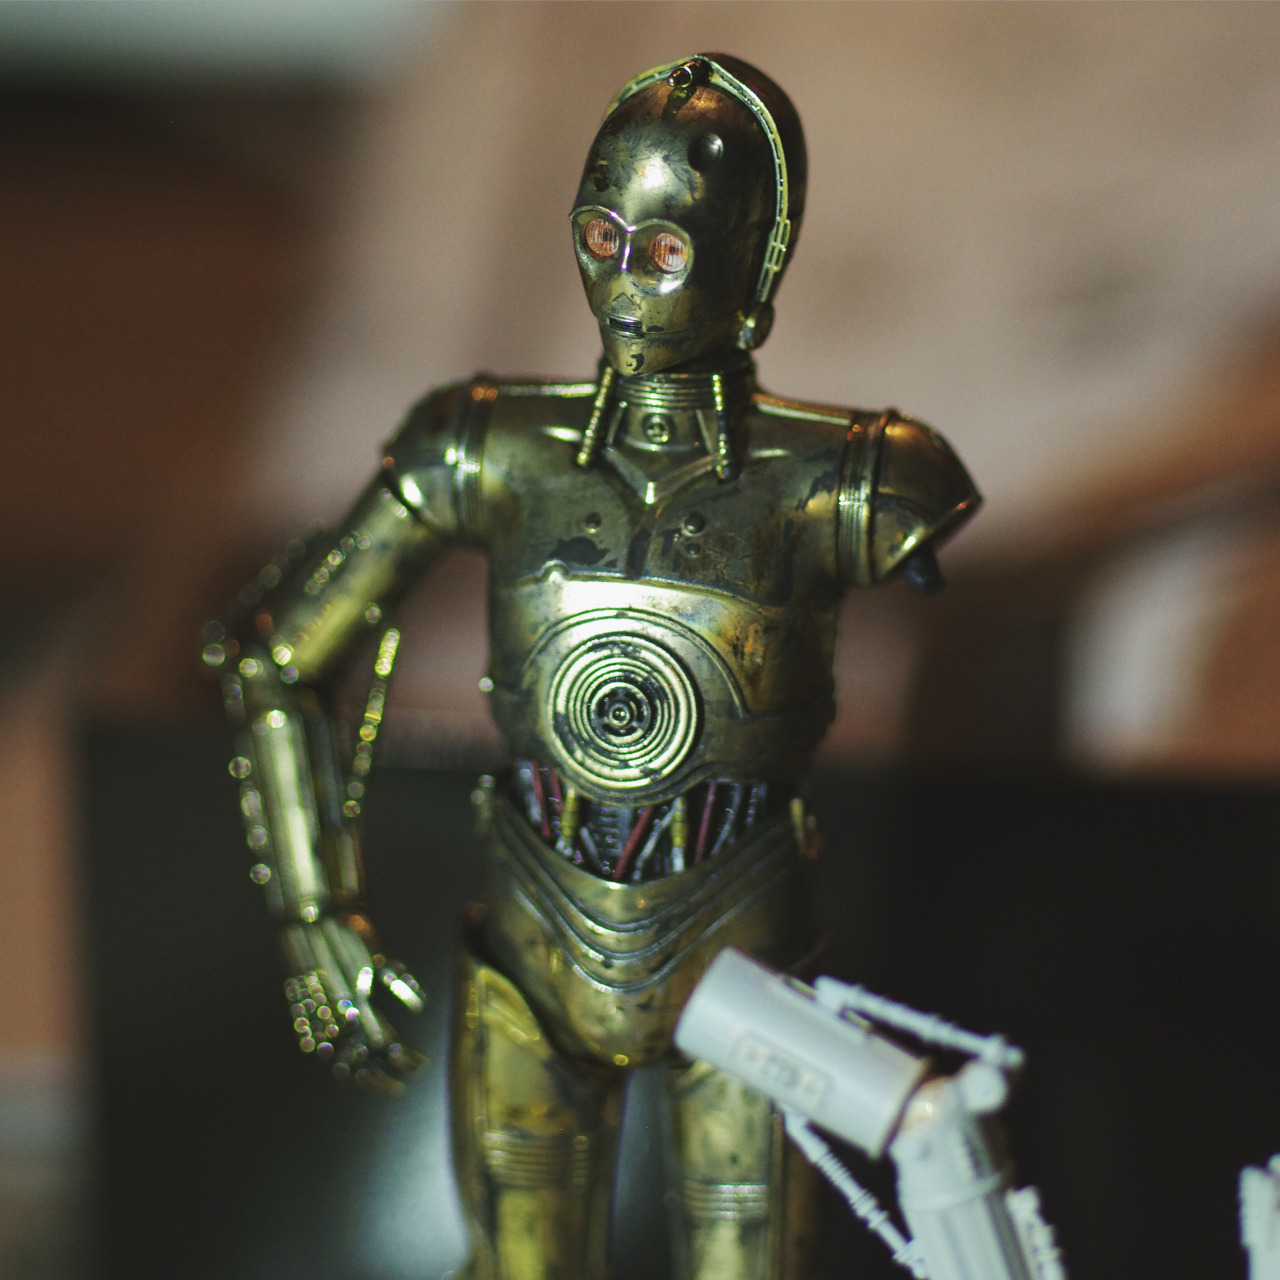 prepping C-3PO's red arm